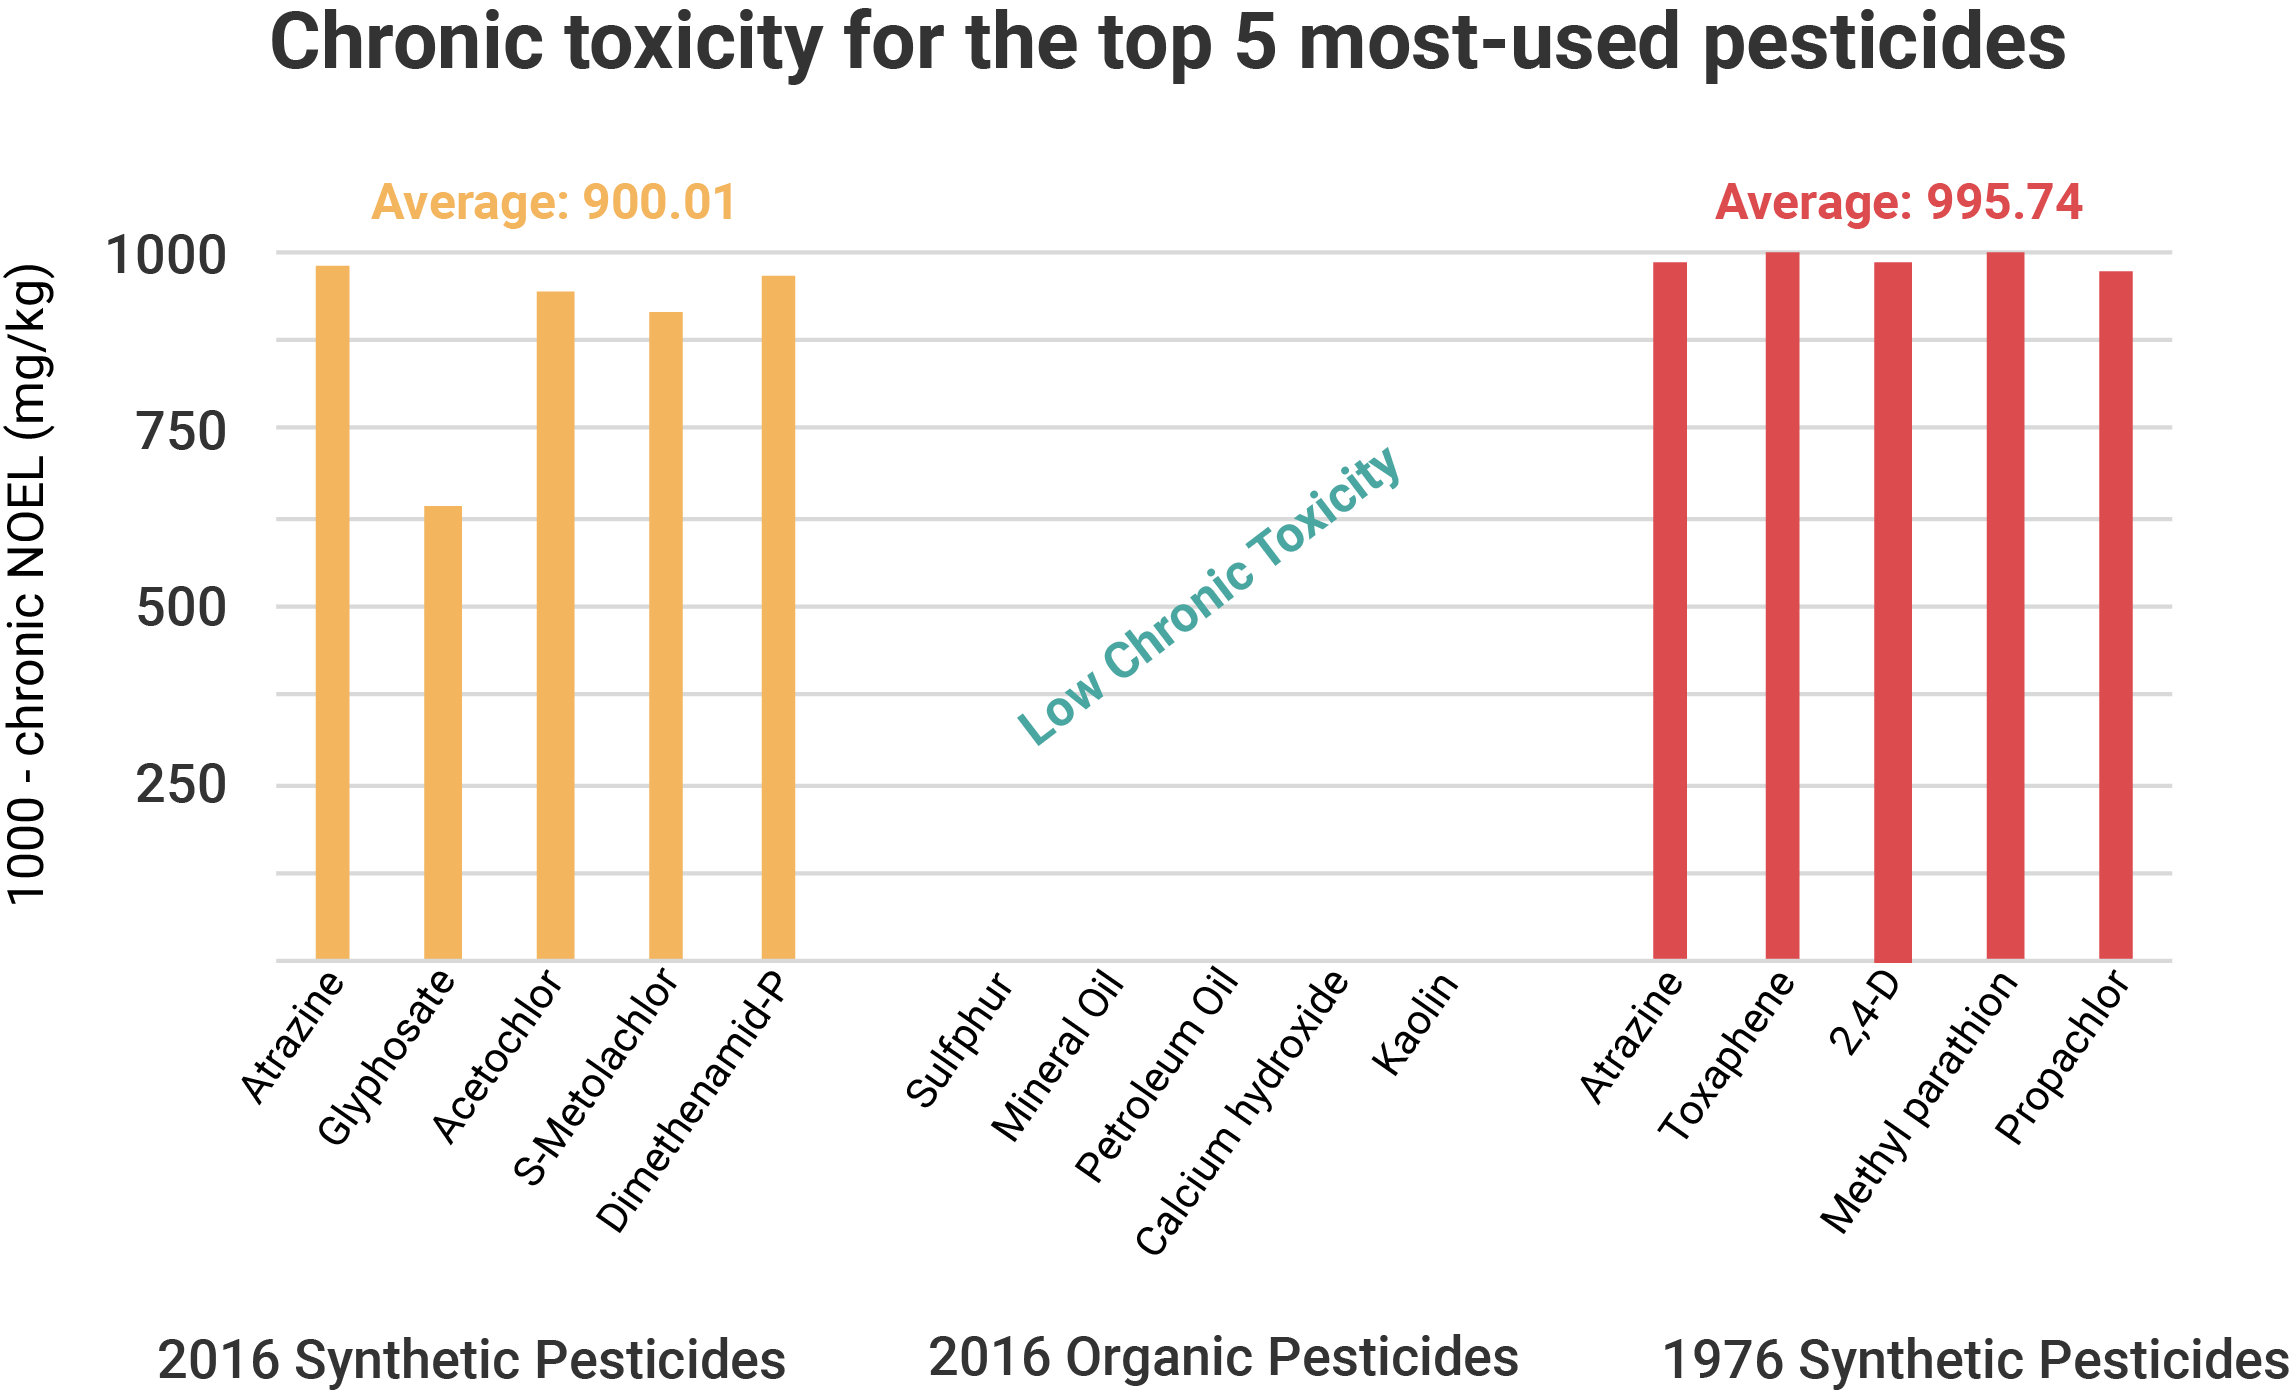 A graph comparing the chronic NOEL values for the top 5 most-used synthetic pesticides from 1976, organic pesticides from 2016, and synthetic pesticides from 2016.